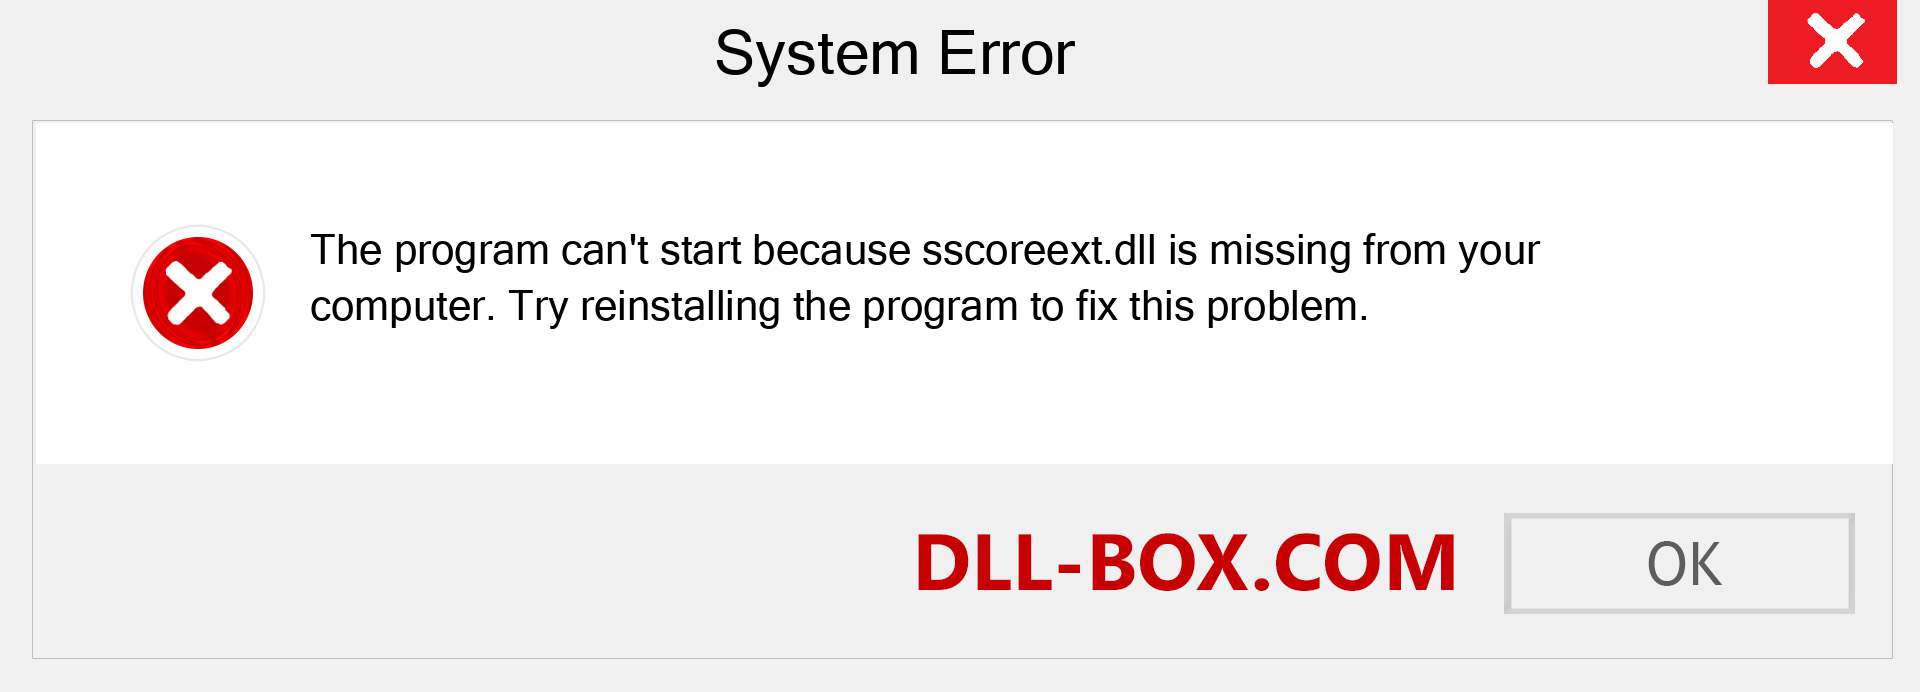  sscoreext.dll file is missing?. Download for Windows 7, 8, 10 - Fix  sscoreext dll Missing Error on Windows, photos, images